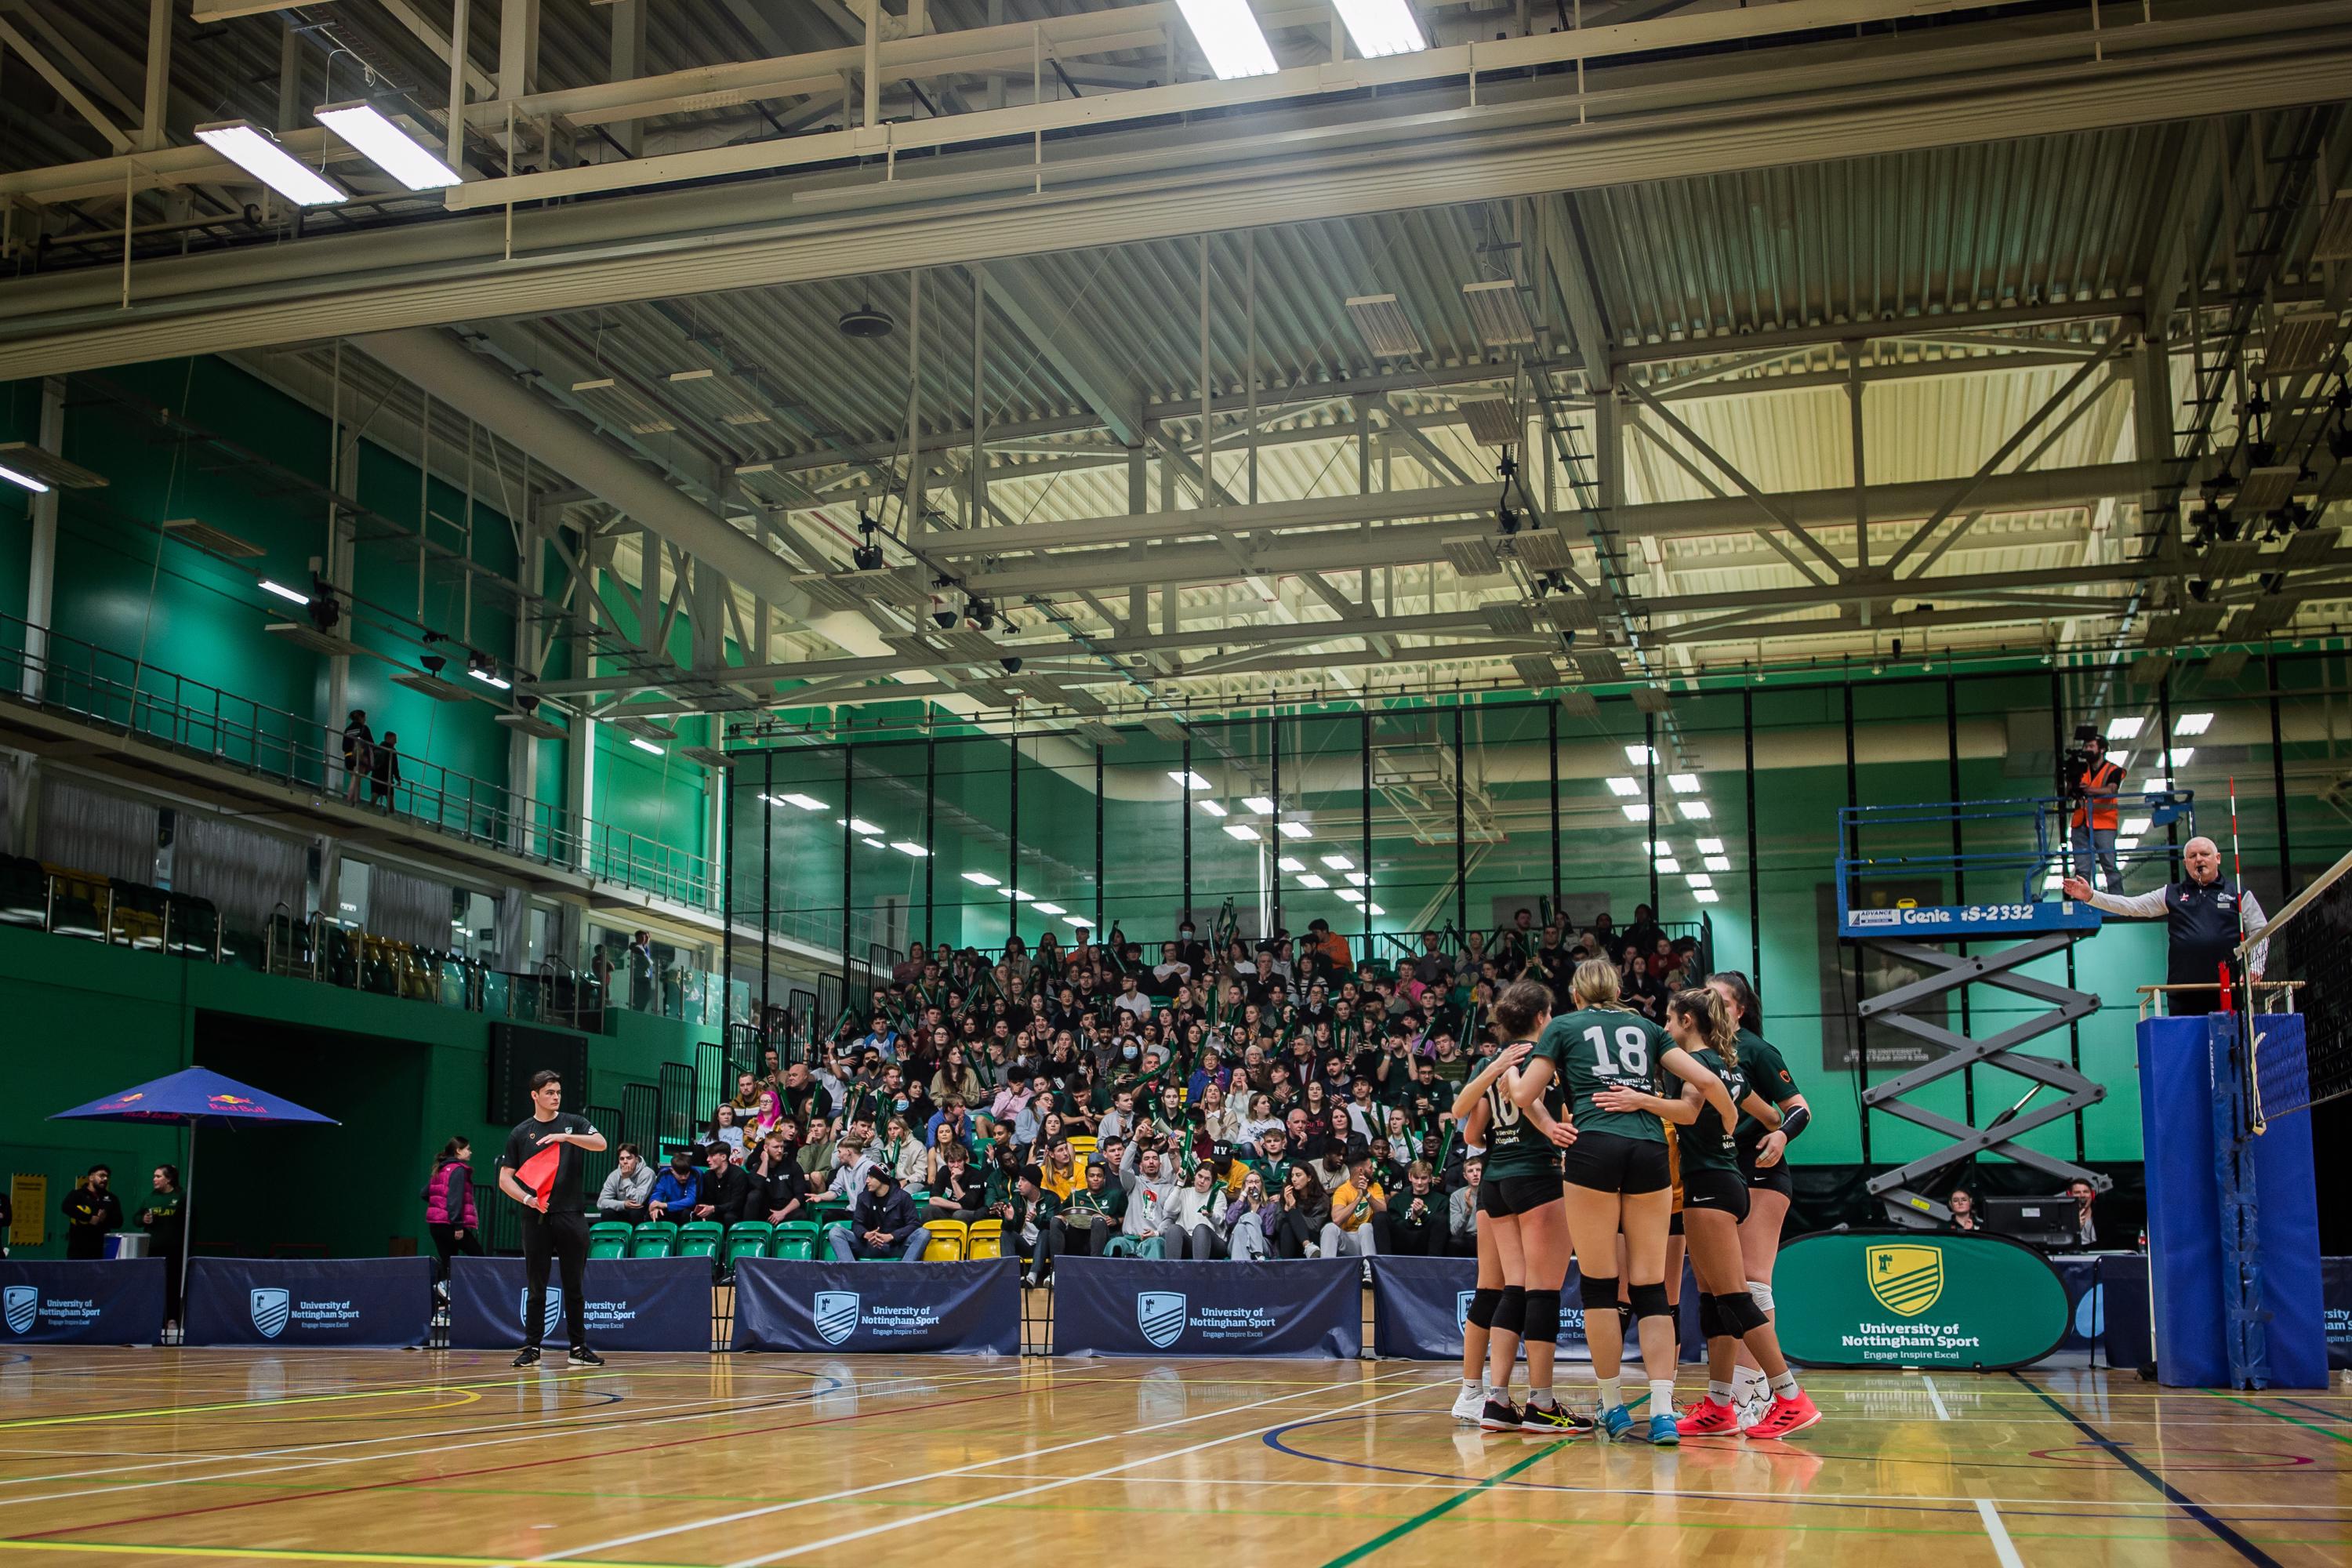 University of Nottingham Women's Volleyball team in front of the Headliner crowd